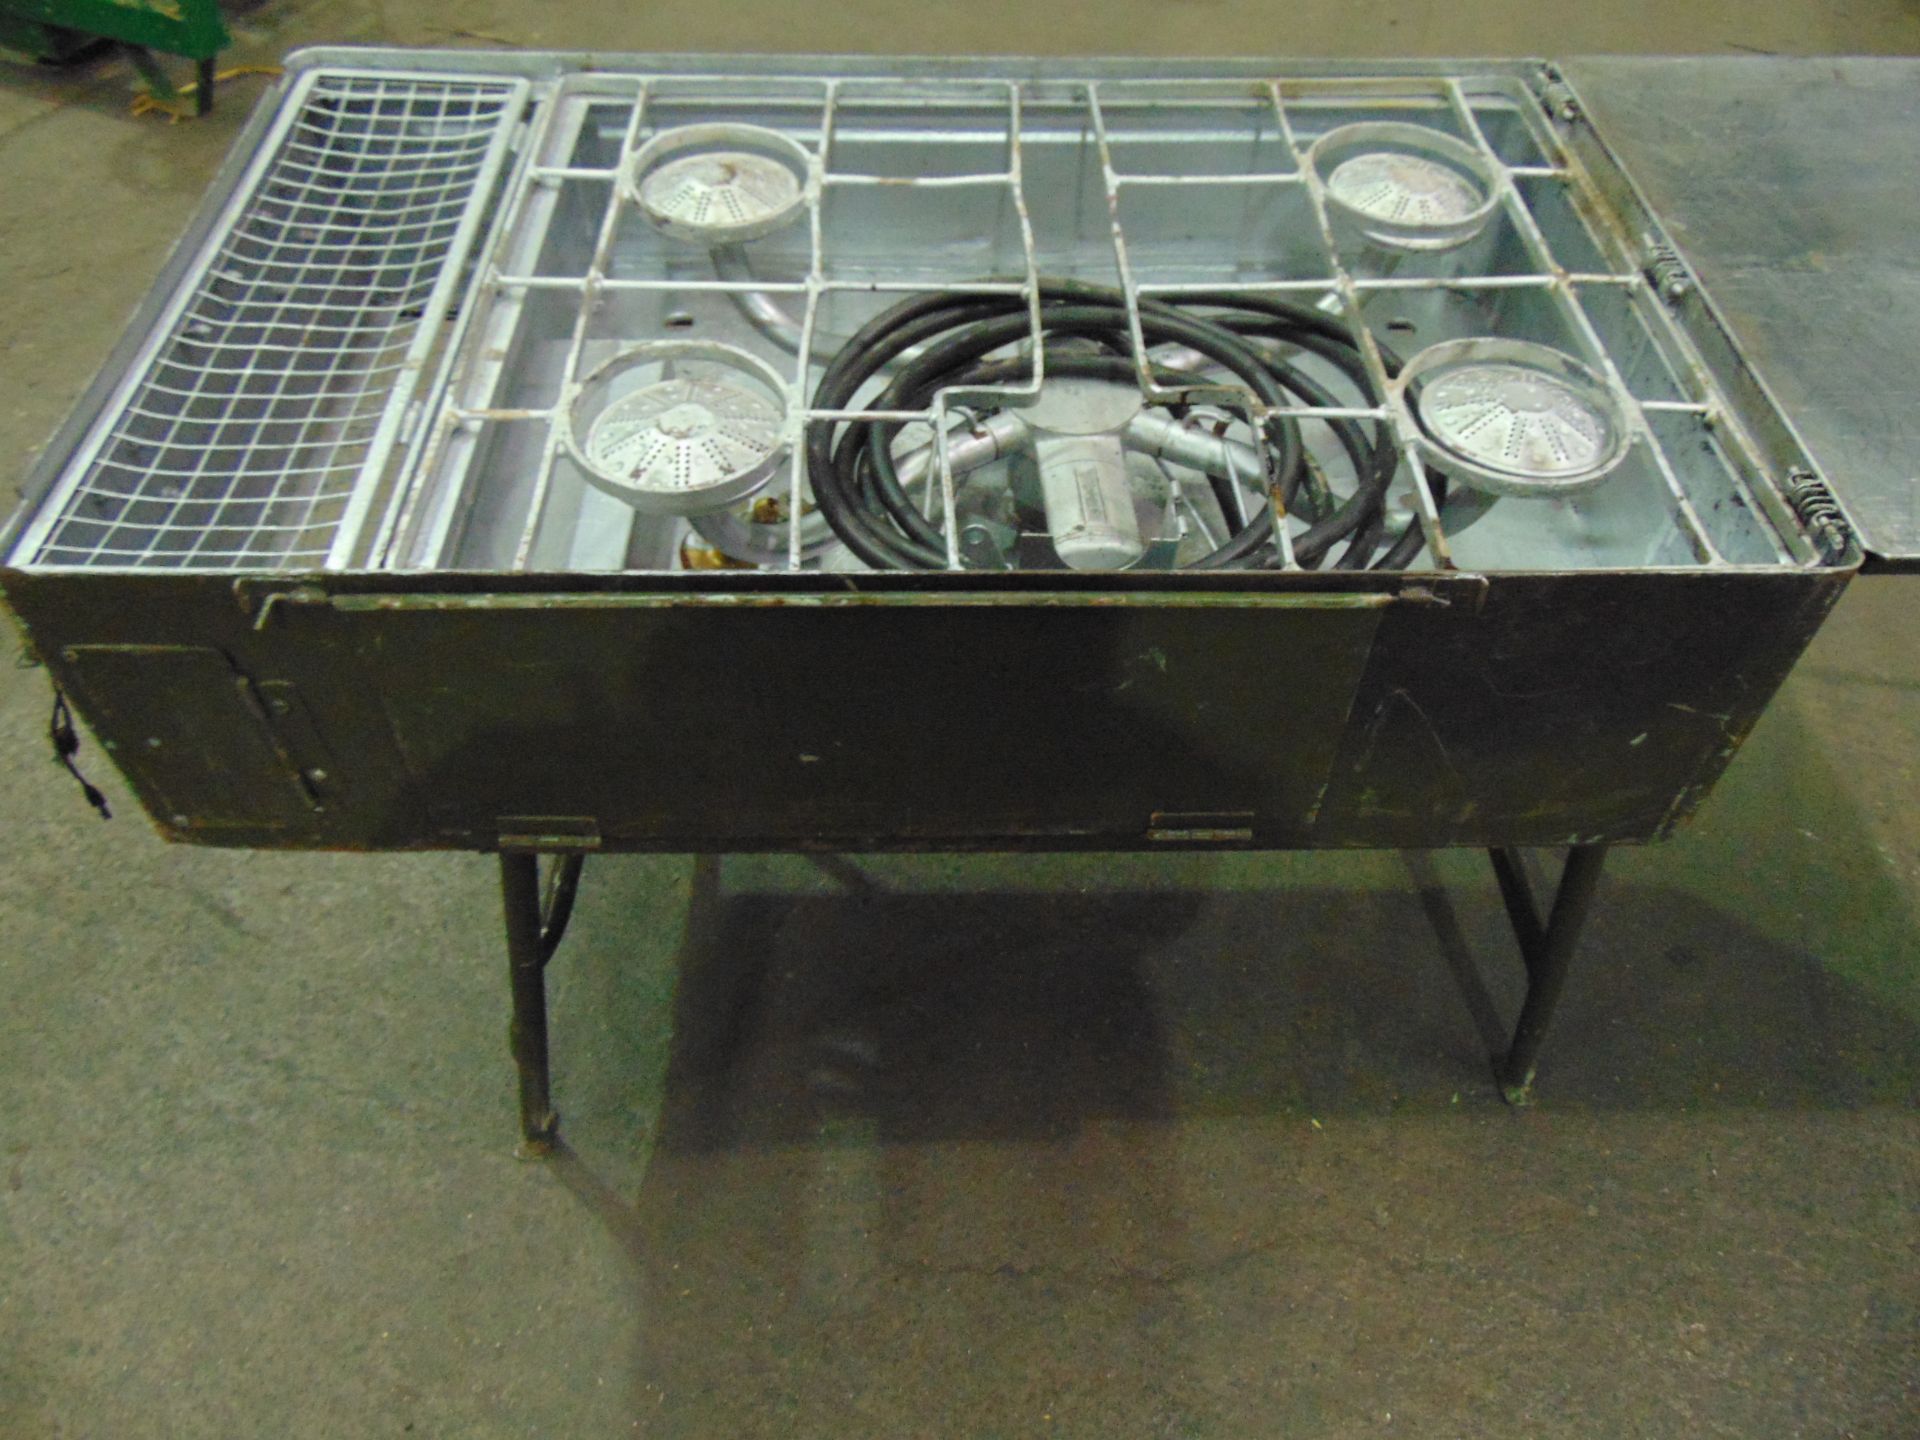 Field Kitchen No5 4 Burner Propane Cooking Stove - Image 5 of 7